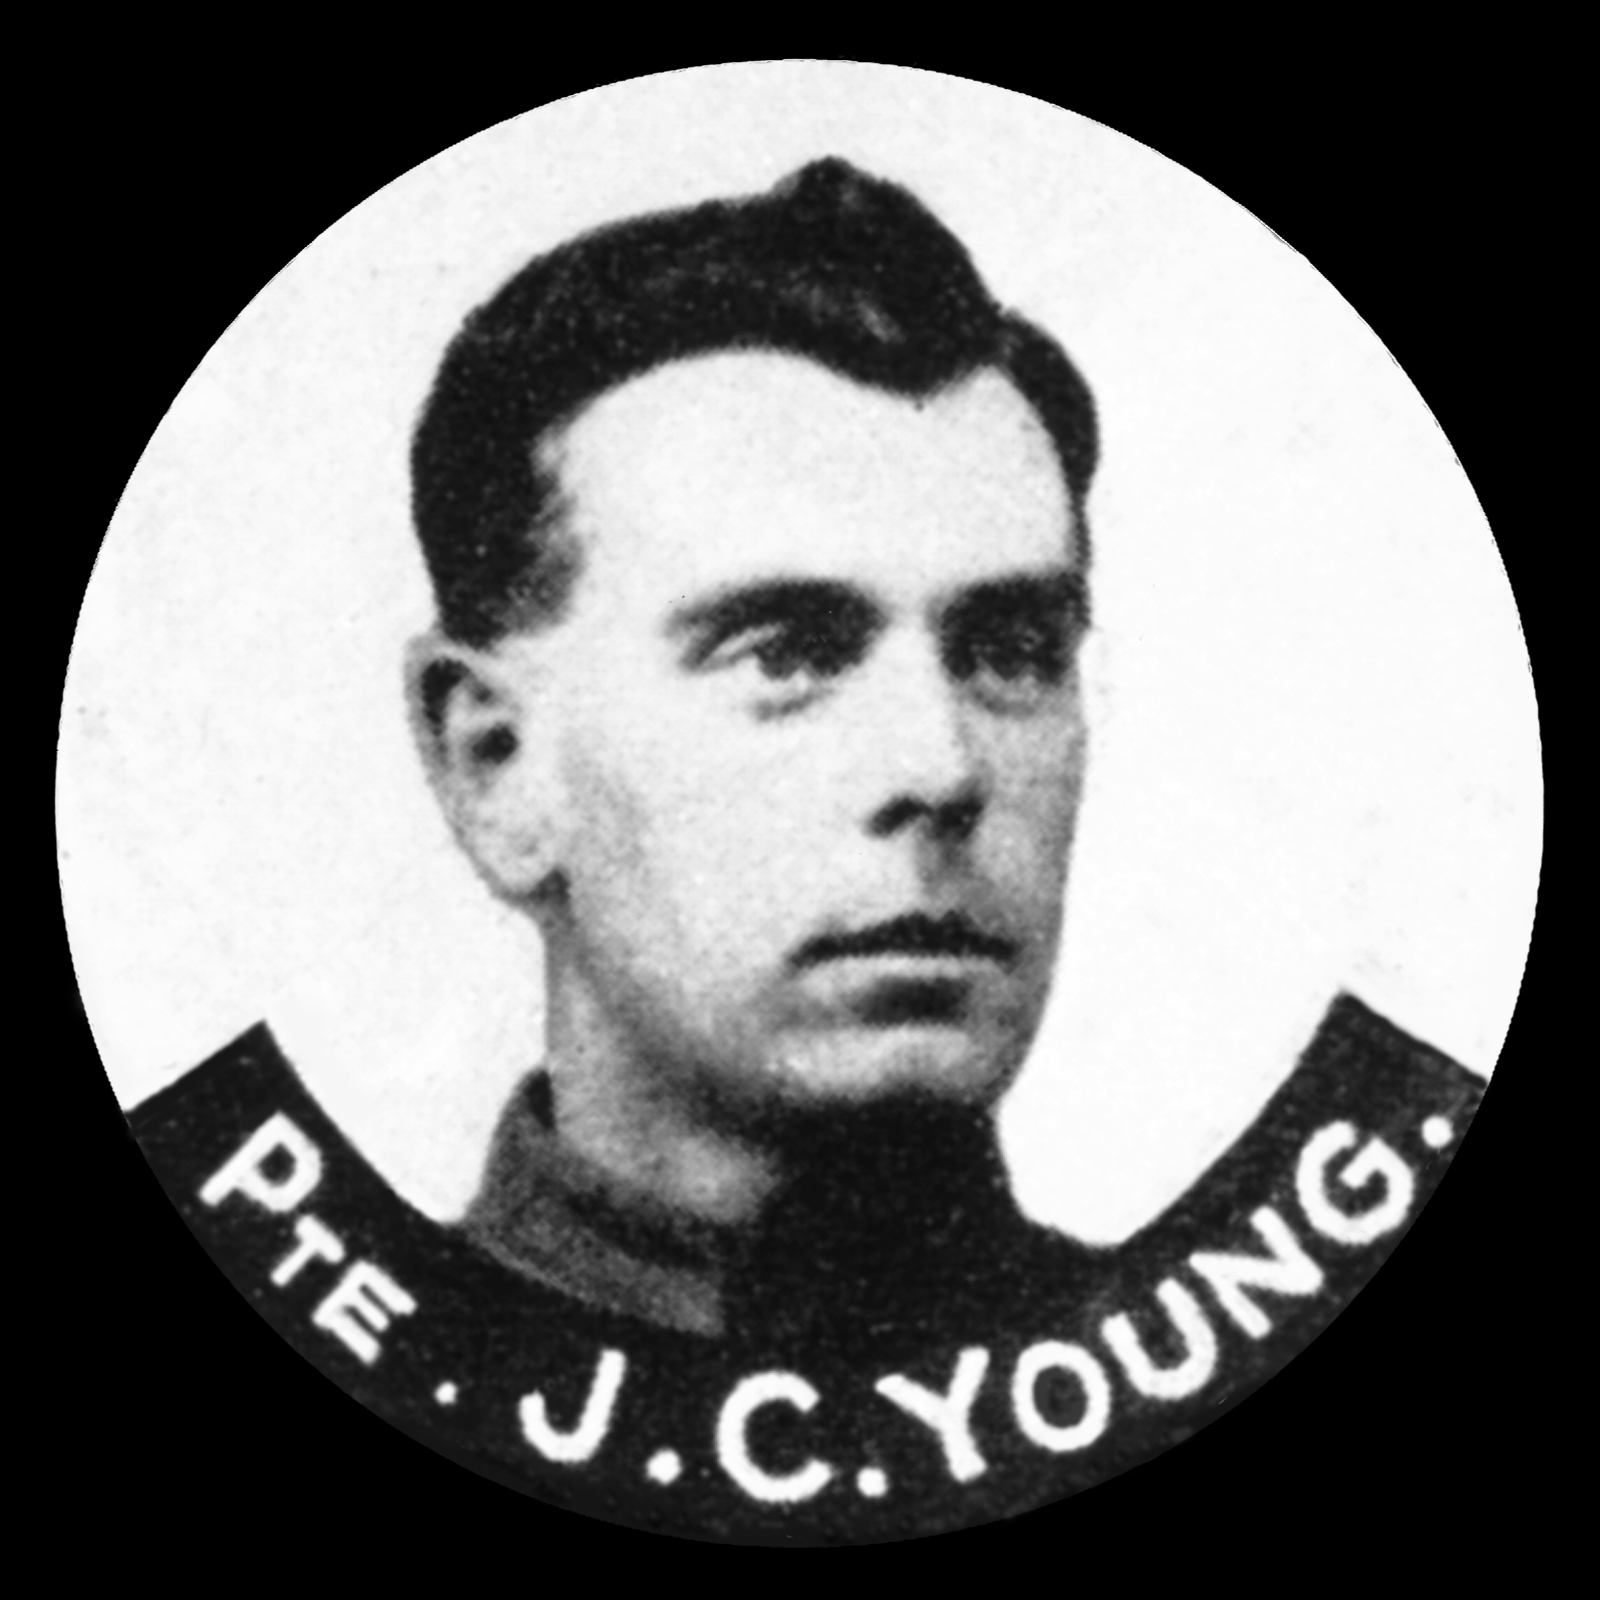 YOUNG Joseph Cyril